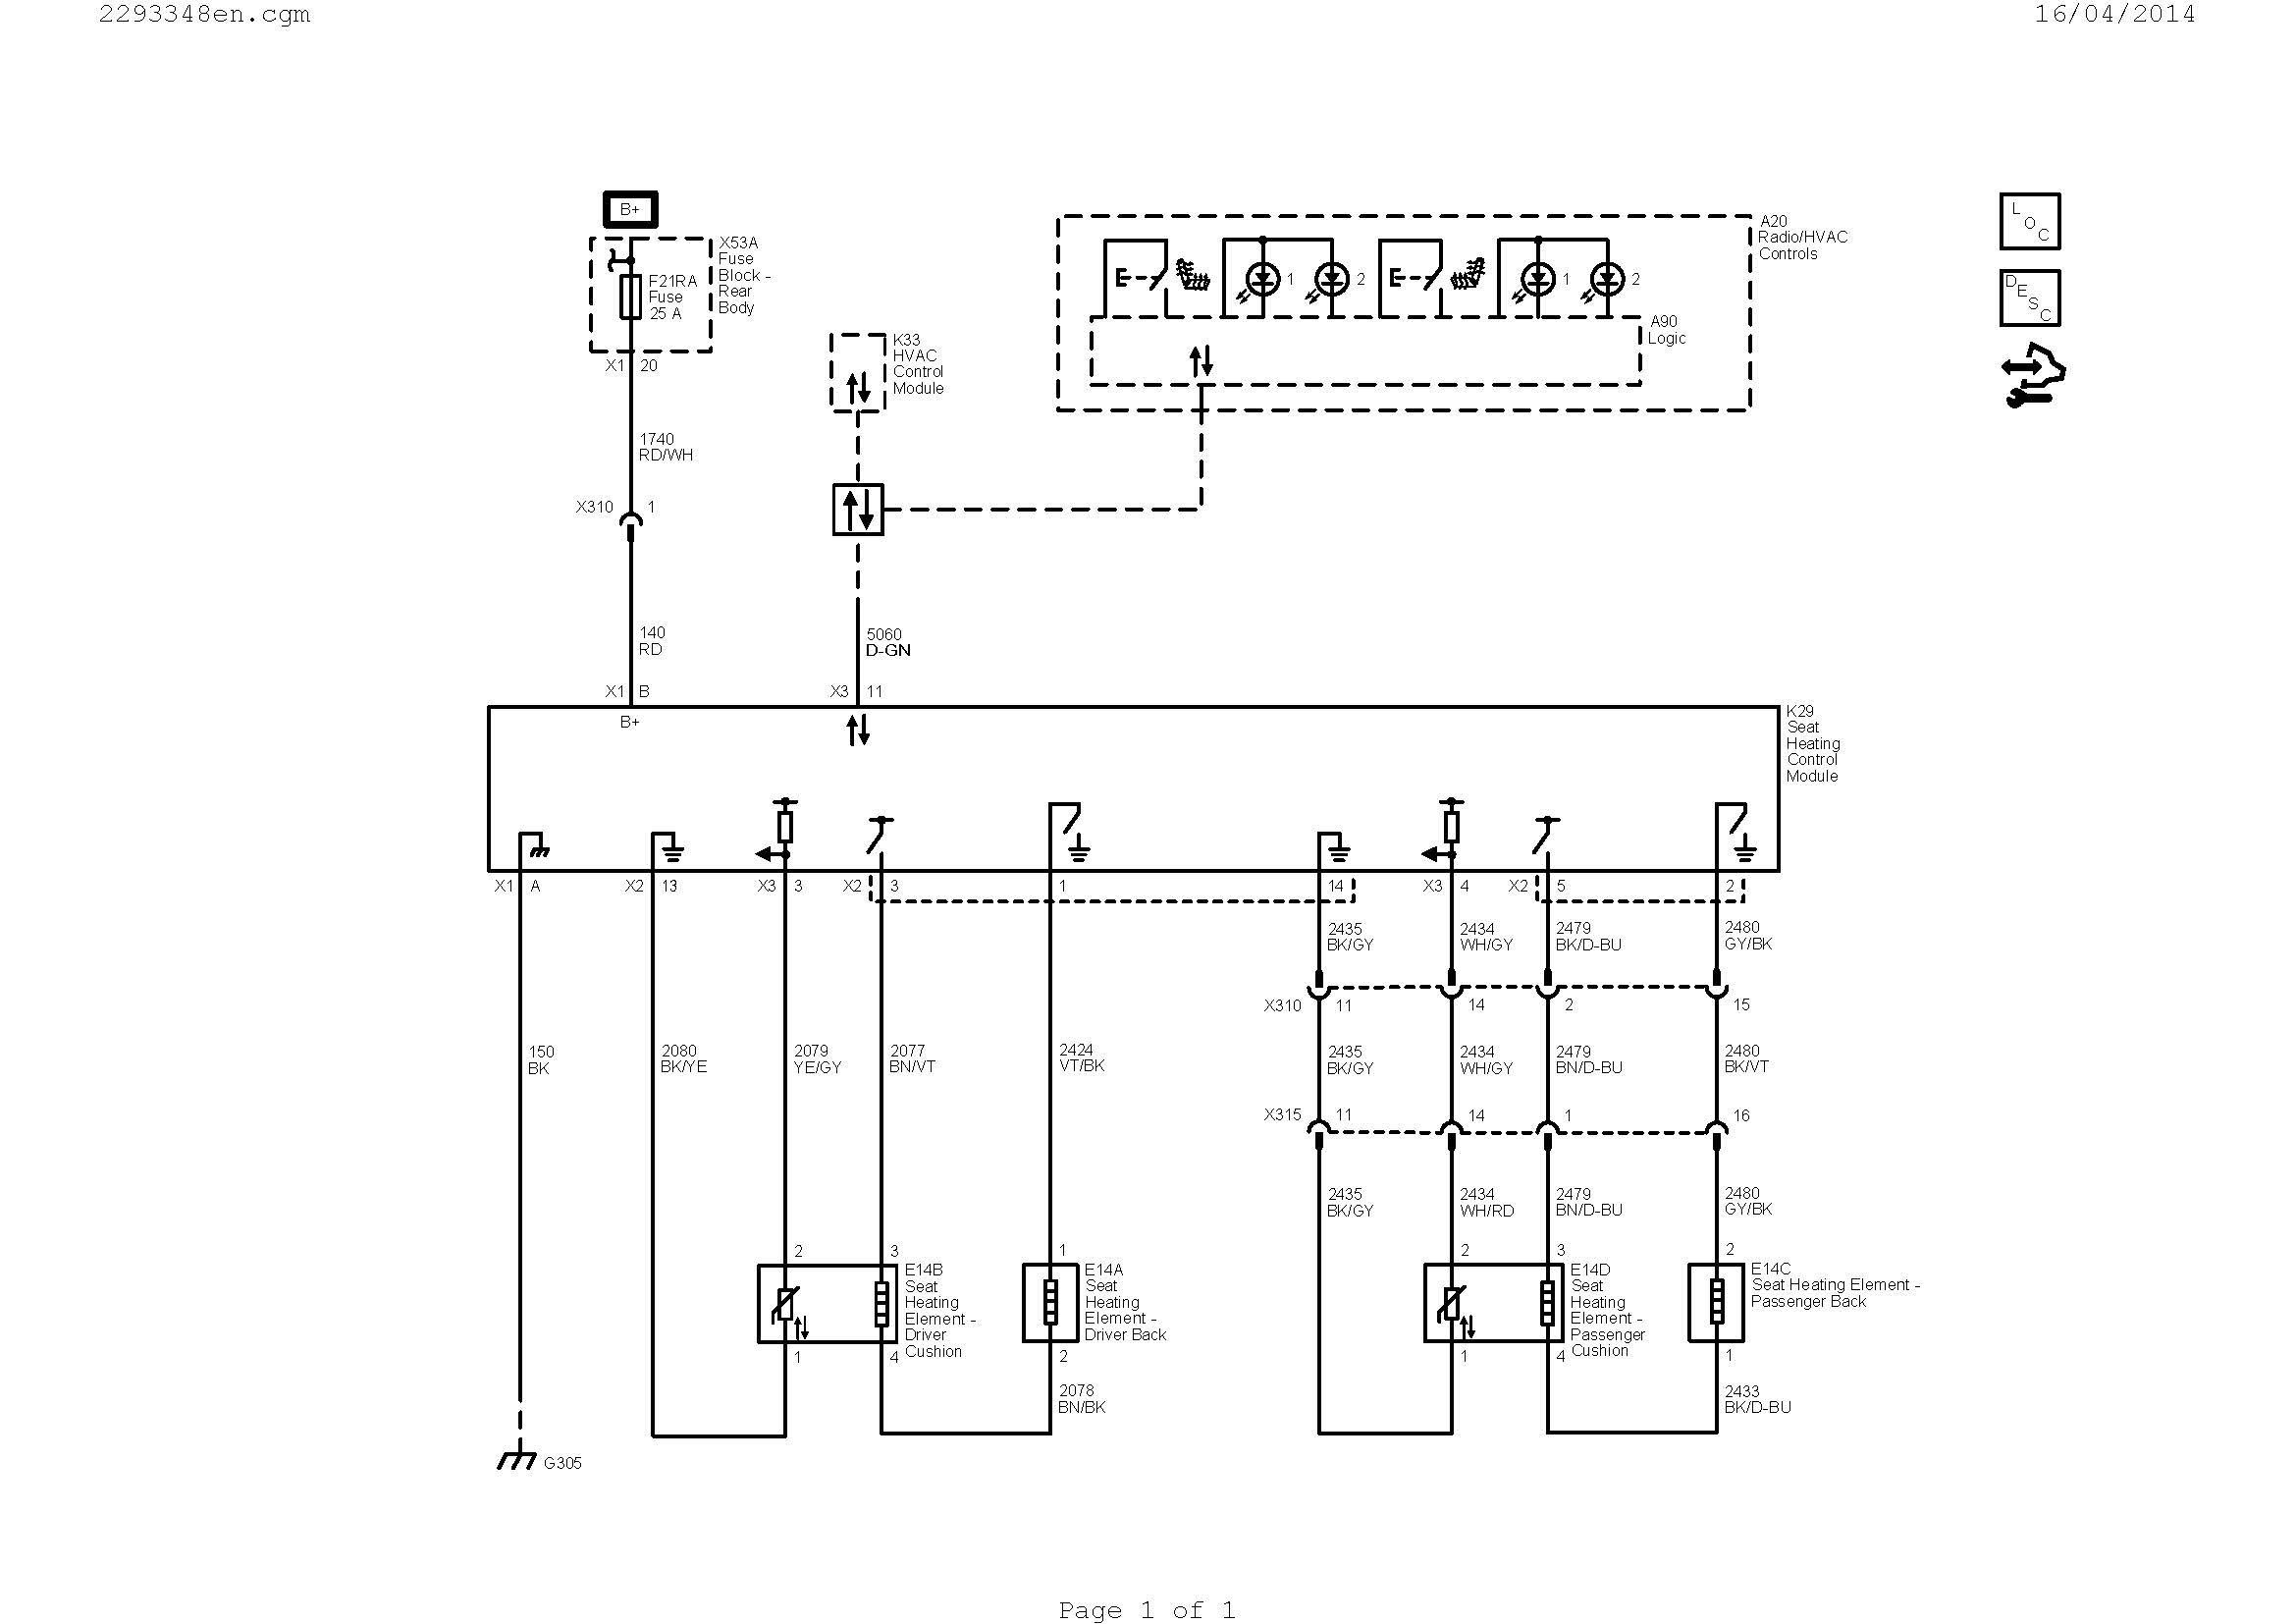 Wiring Diagram for Changeover Relay Inspirationa Wiring Diagram Ac Valid Hvac Diagram Best Hvac Diagram 0d